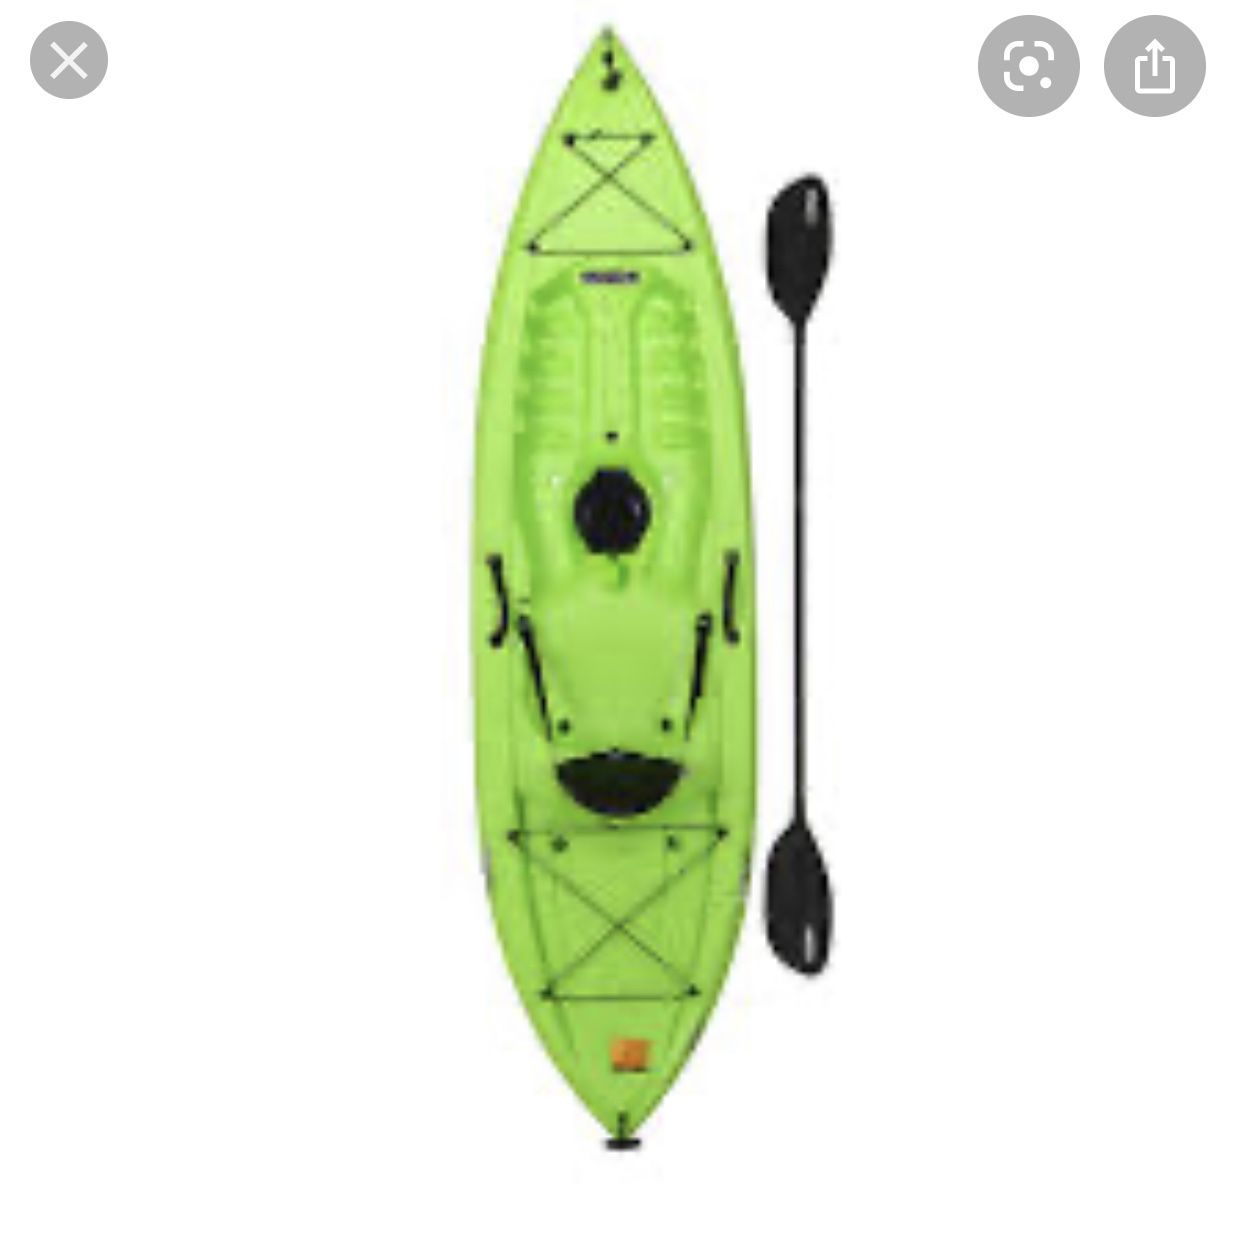 Looking to trade for a kayak